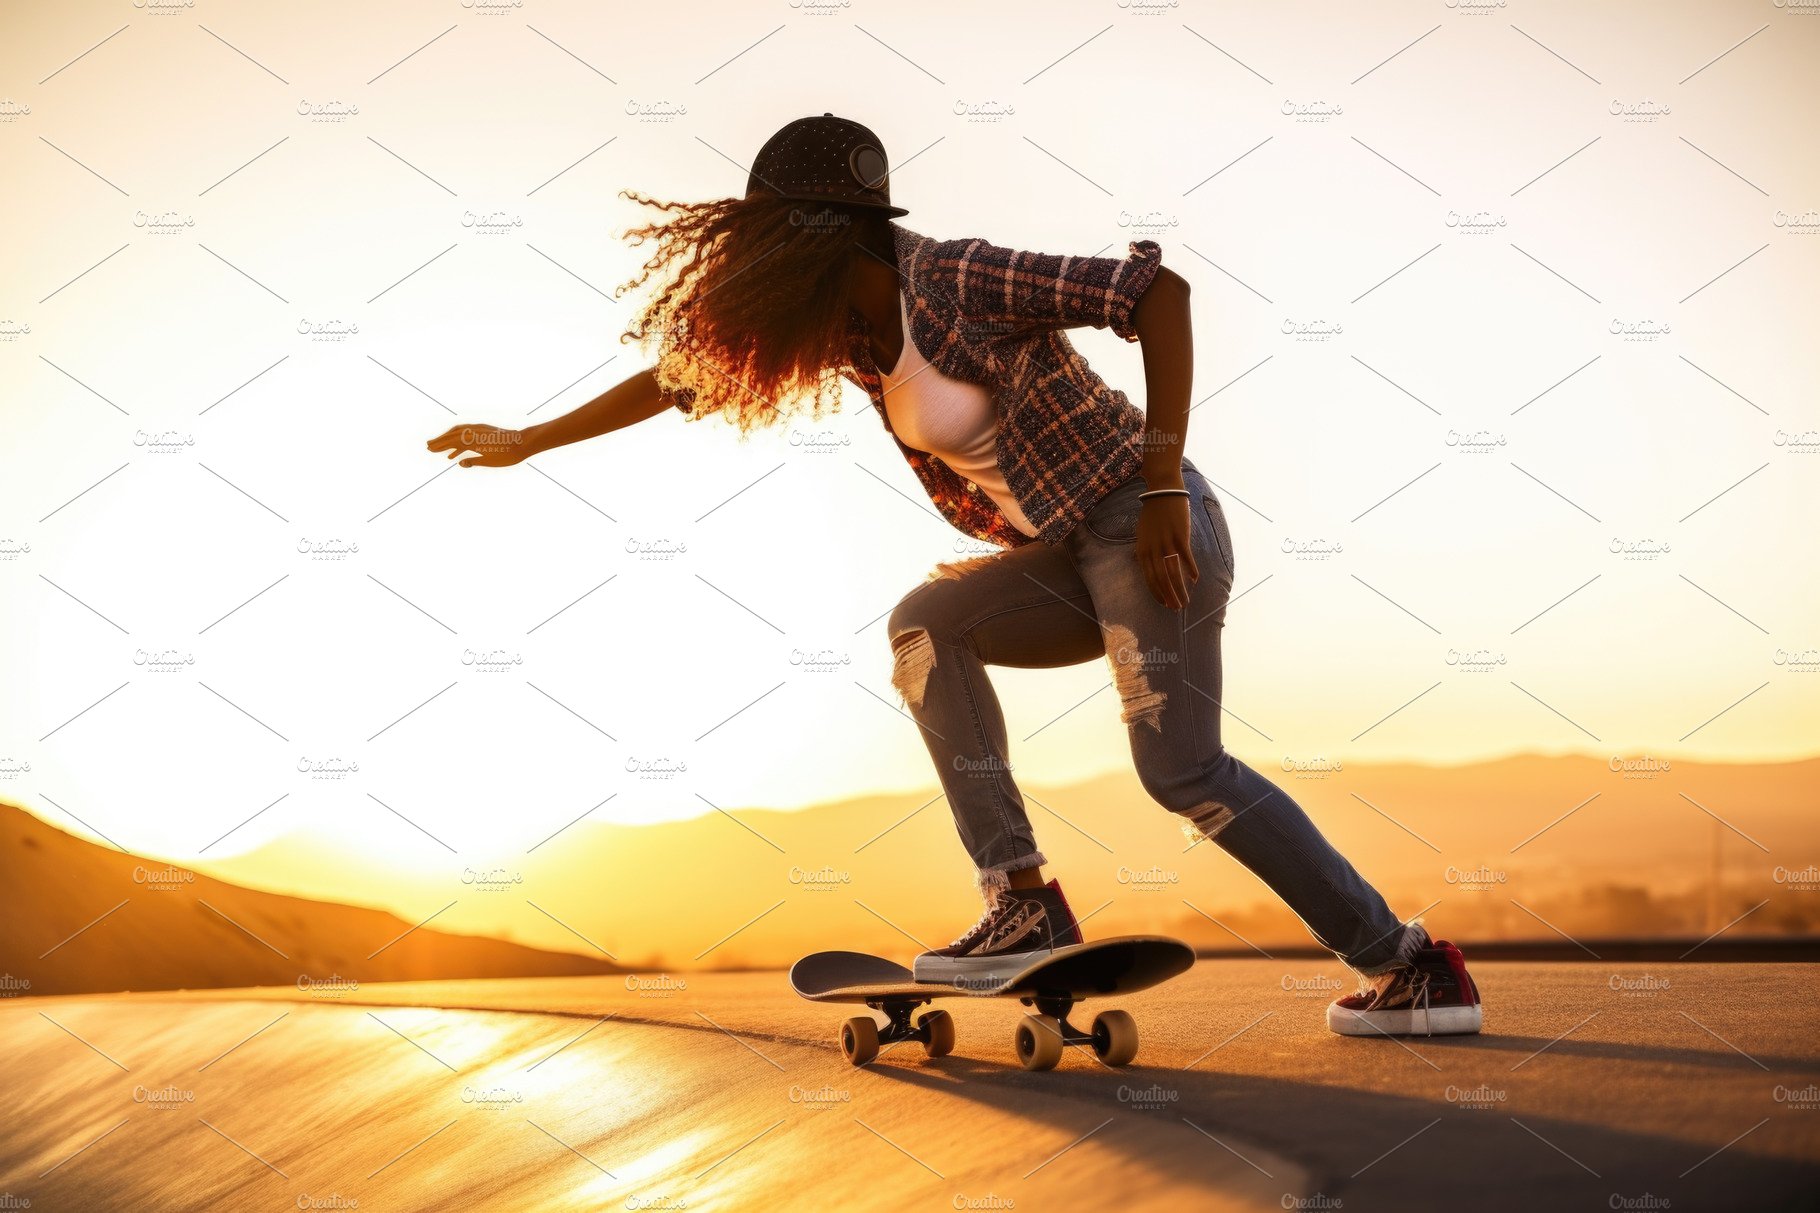 Young woman skateboarding at sunset cover image.